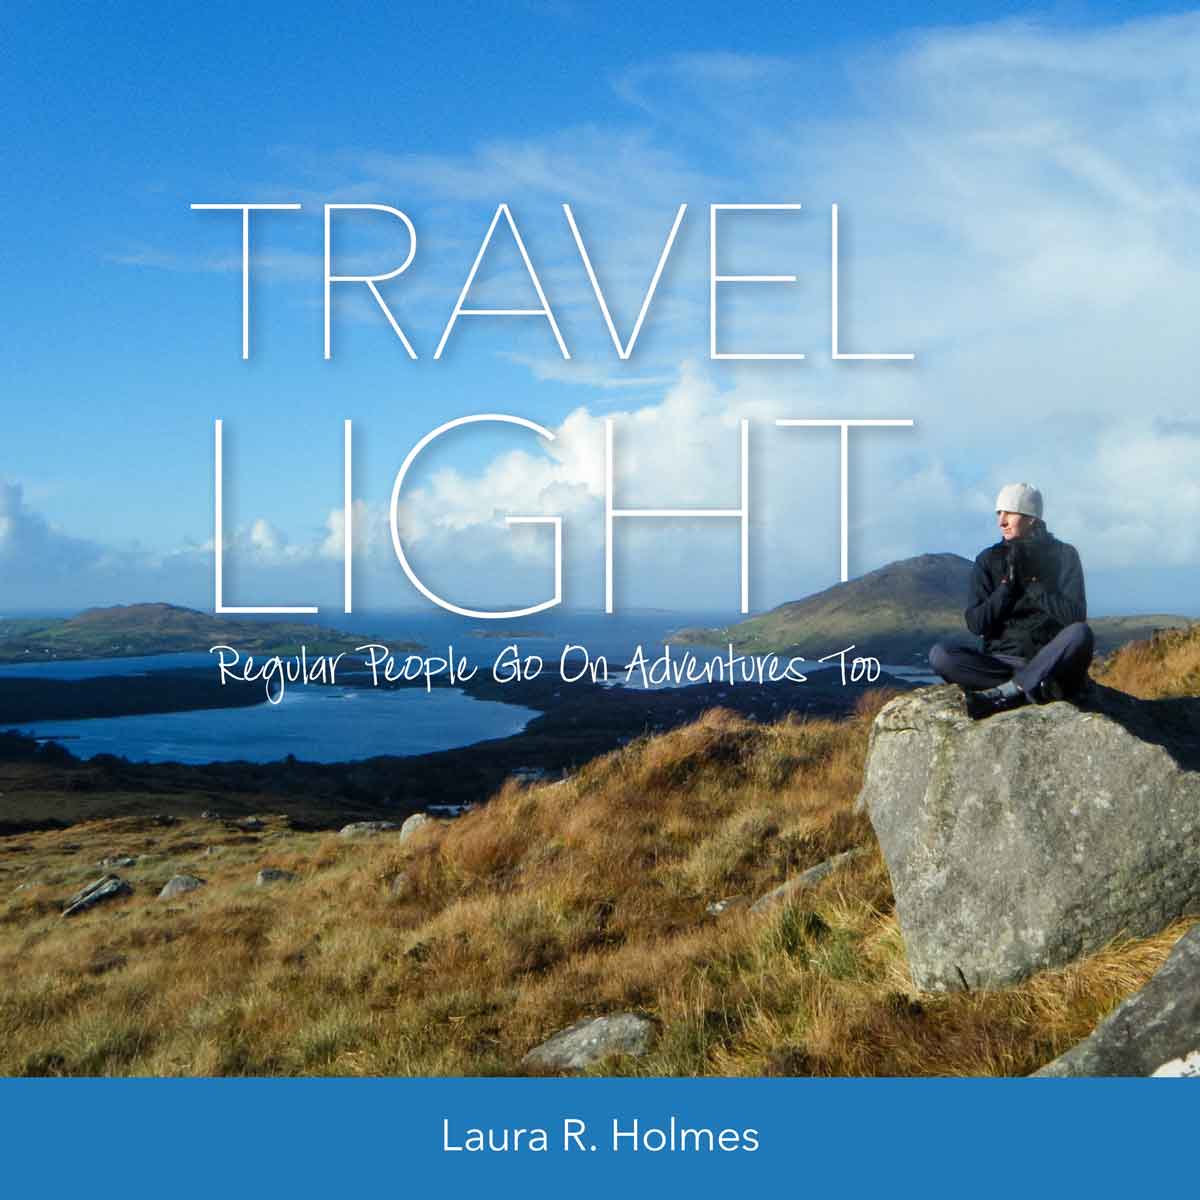 Travel Light: Regular People Go On Adventures Too by Laura R. Holmes, book cover